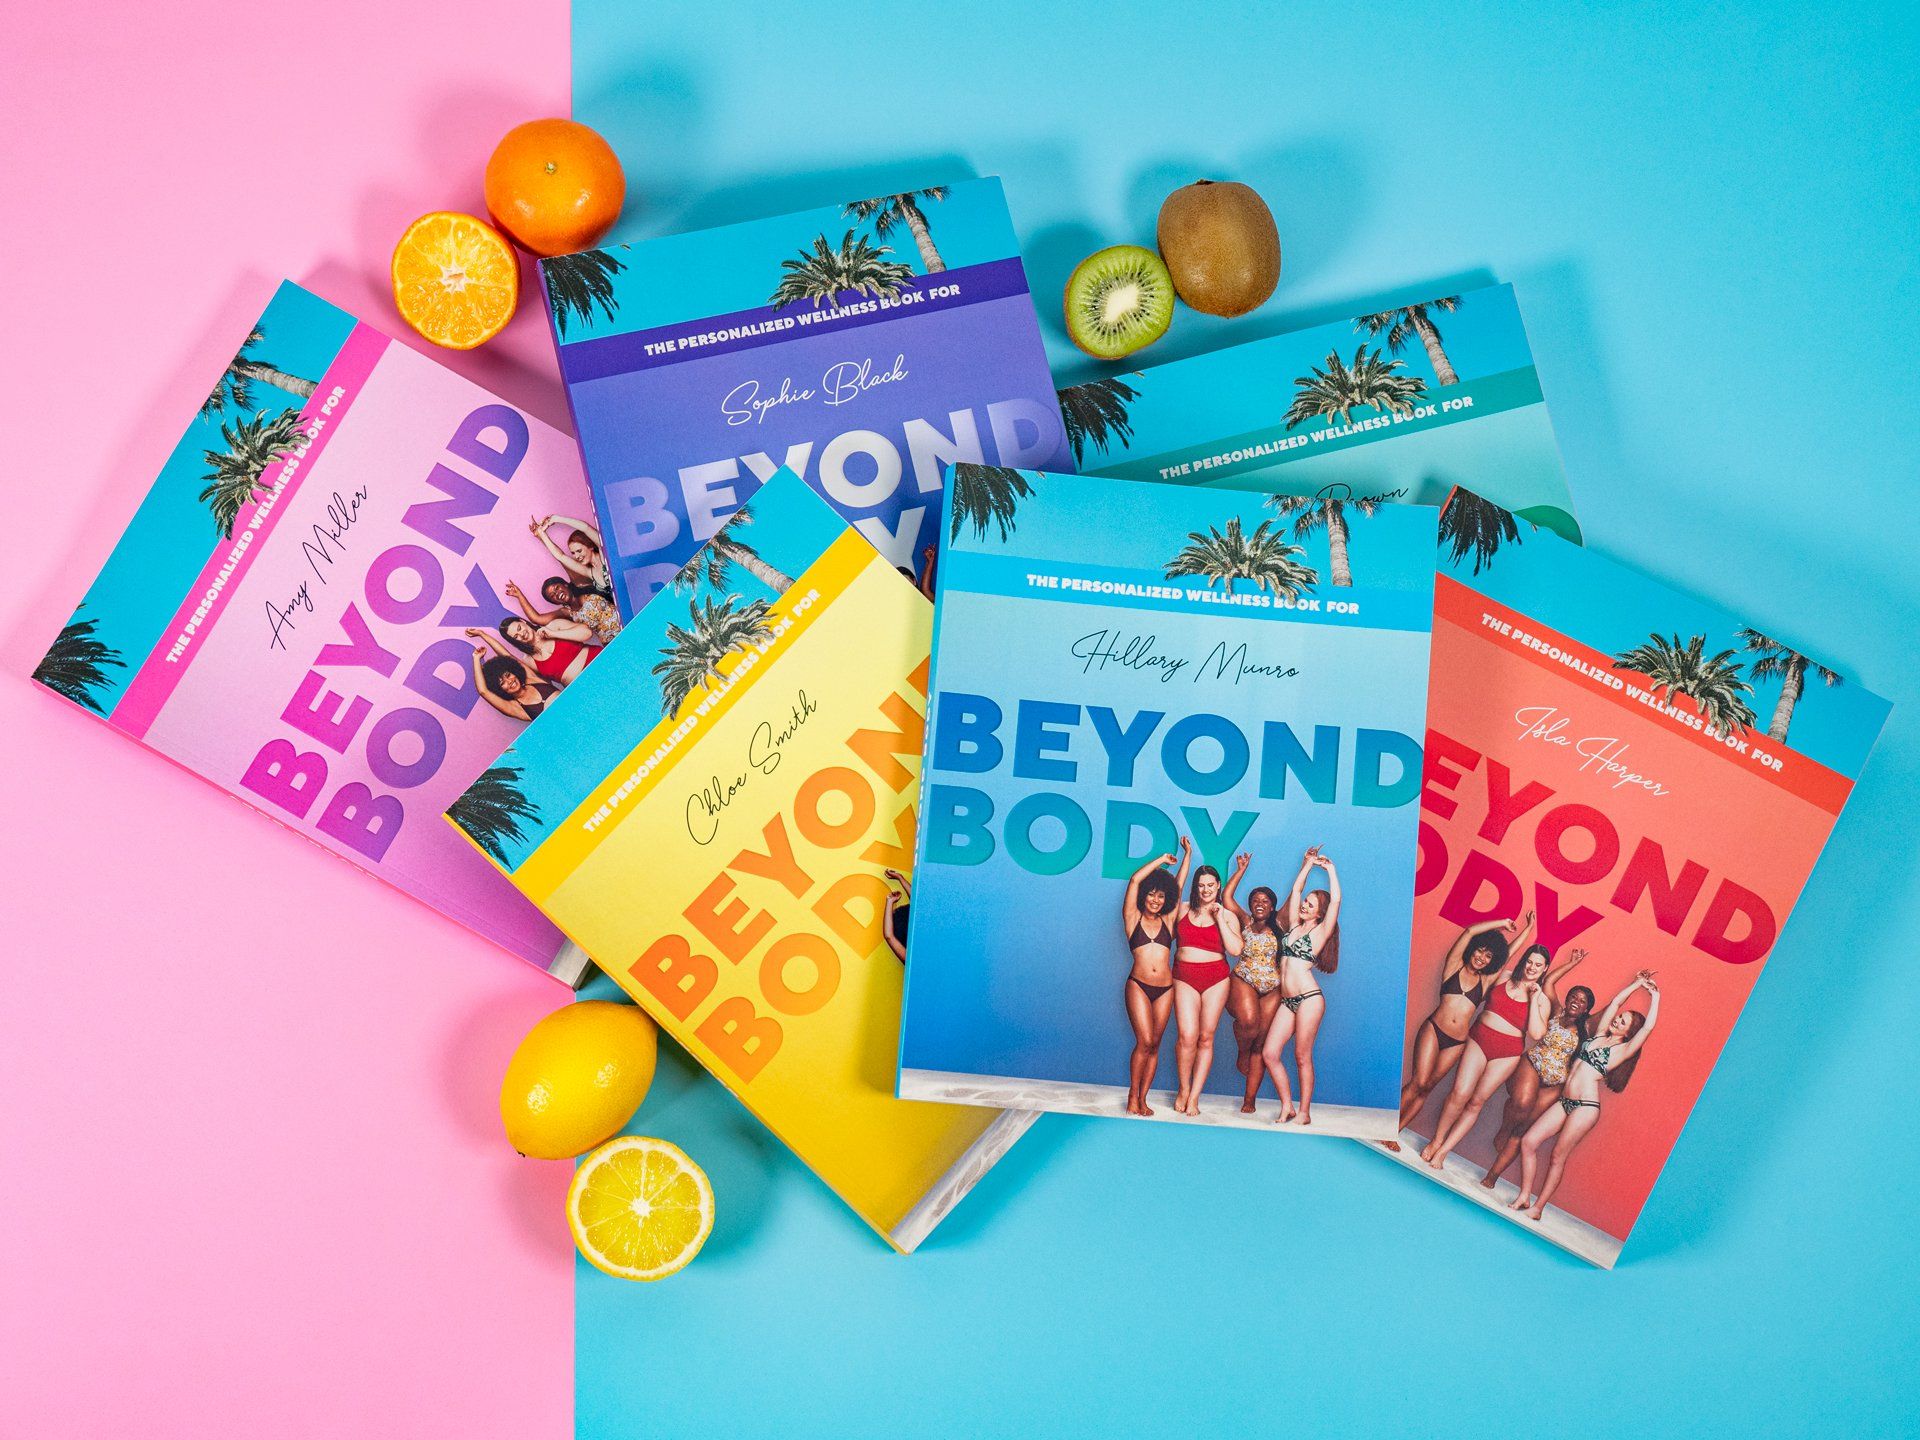 Selling more than 200,000 personalized copies in 170 countries, Beyond Body offers customized nutrition plans from top-rated nutritionists collaborating with professional trainers to compose the ideal workout plan for your body. This Lithuanian based company also provides additional content relating to self-growth, including stress management techniques and habit-forming strategies. Beyond Body is amazing way to afford accountability and the tools needed to provide long-term lifestyle changes